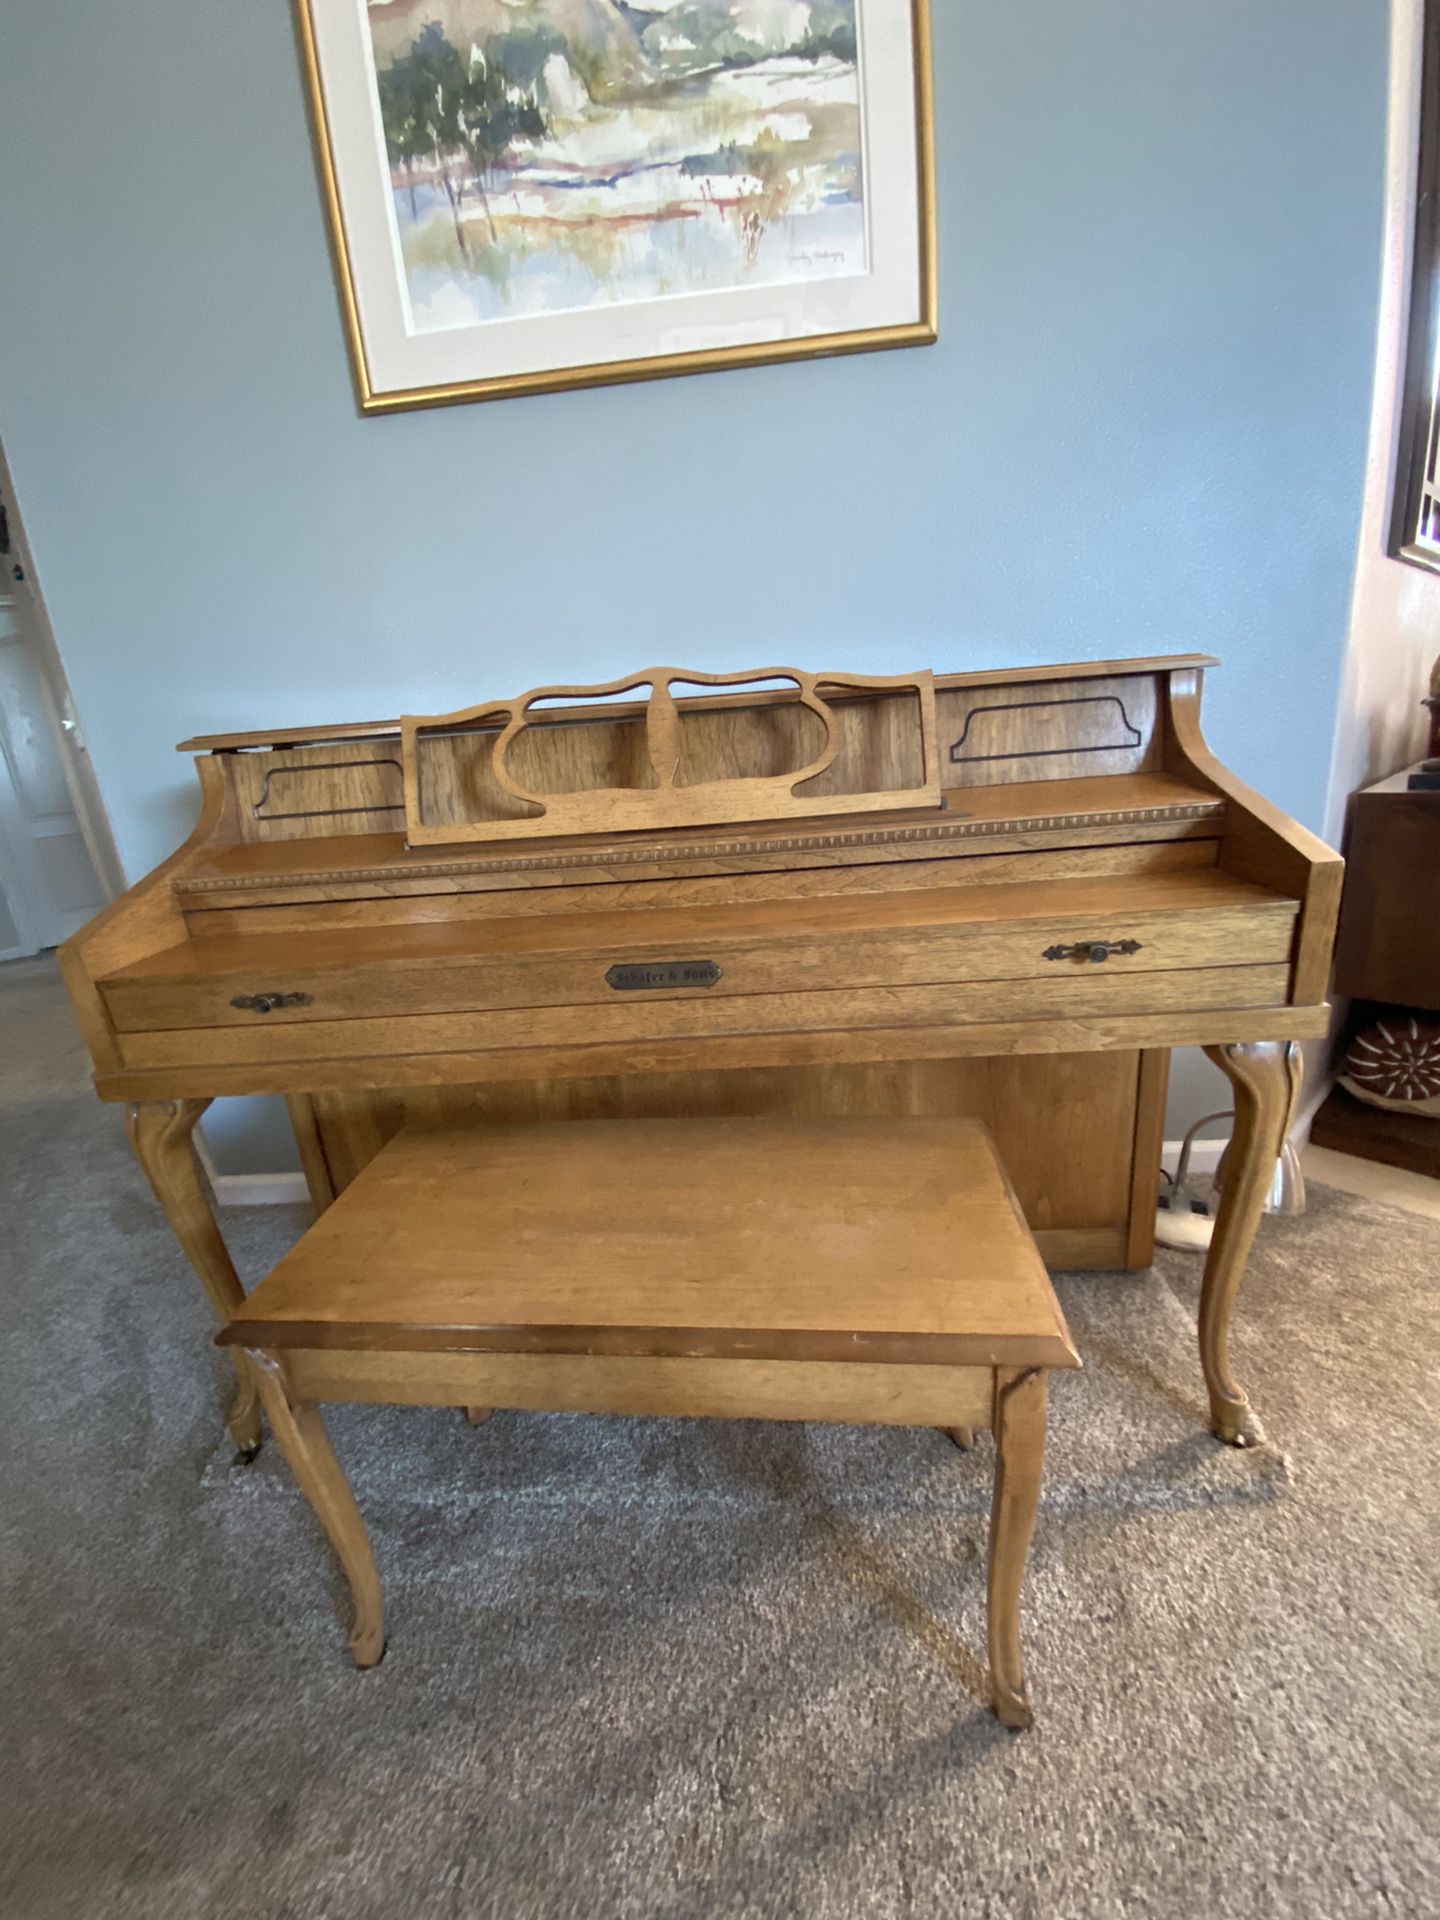 Milk Matcha Mixer Spinet for Sale in Los Angeles, CA - OfferUp